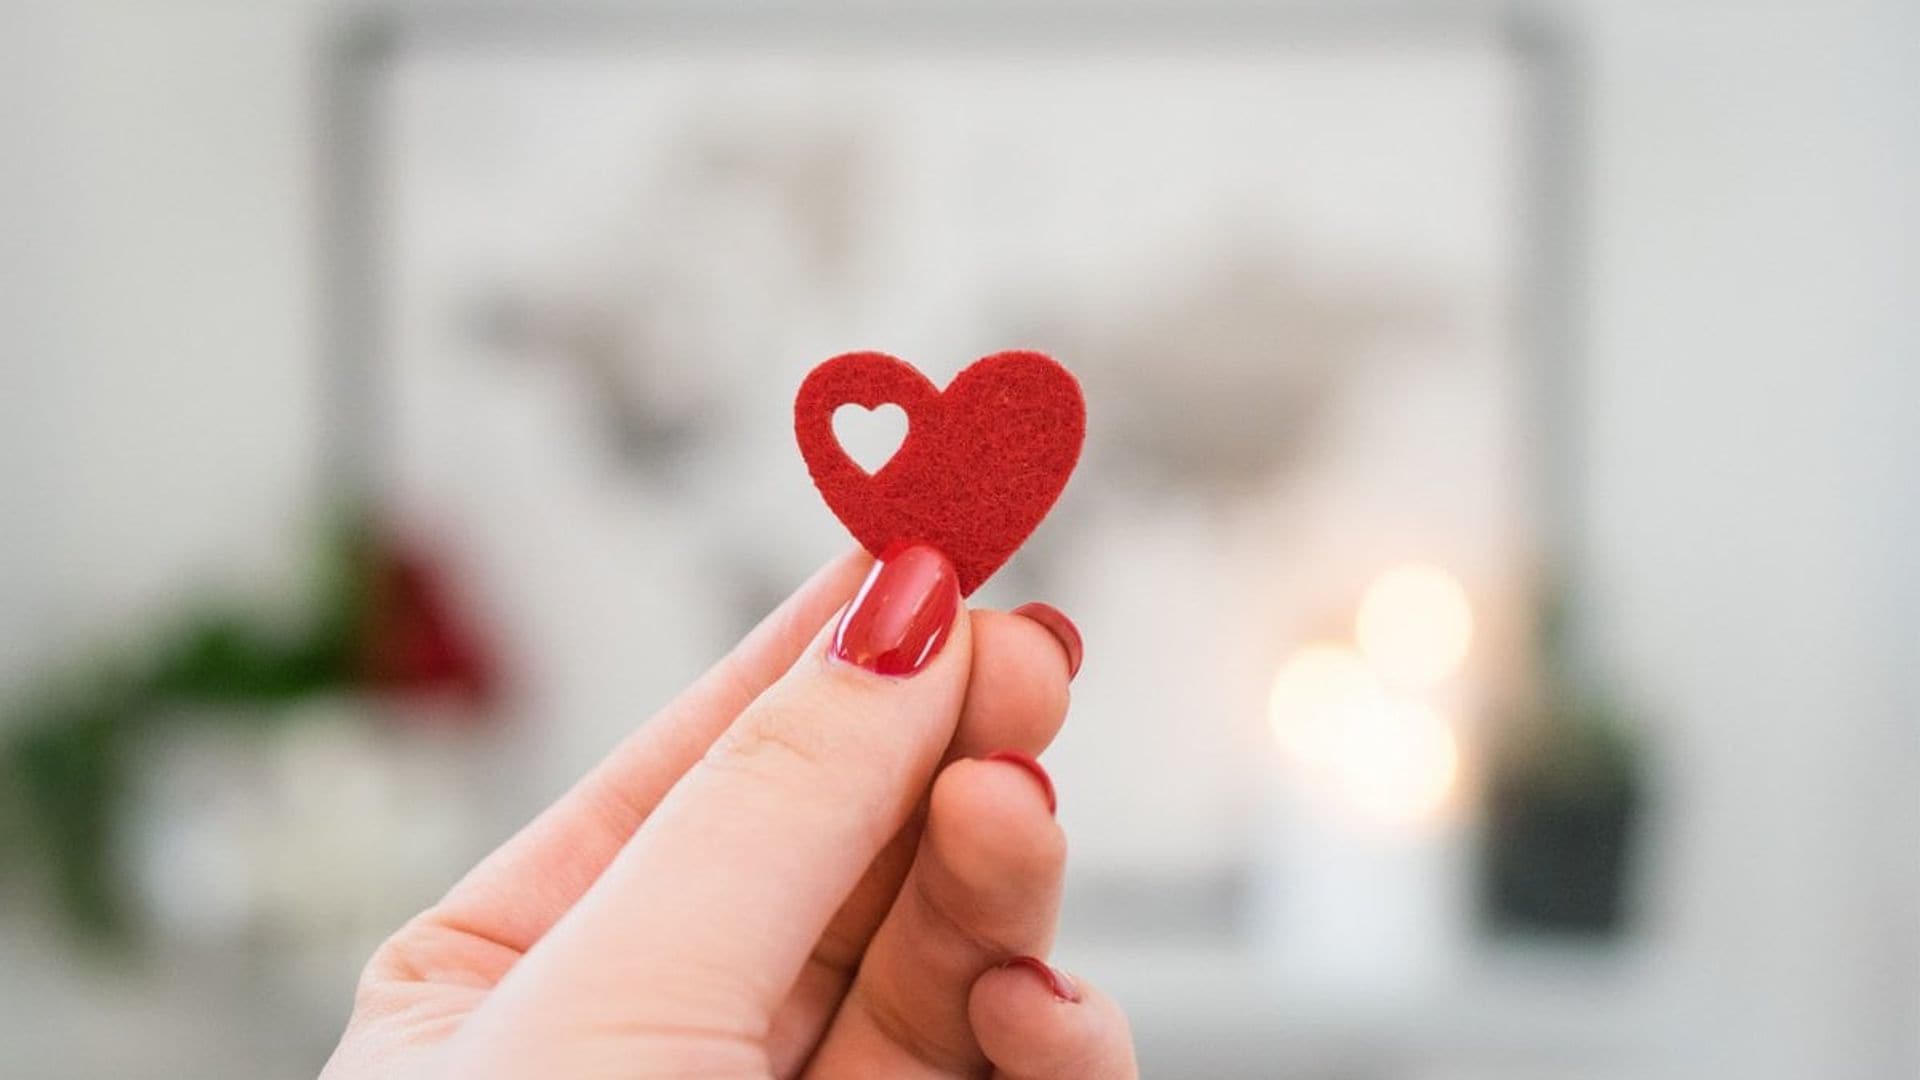 6 Tips to have a successful Valentine's Day during COVID-19